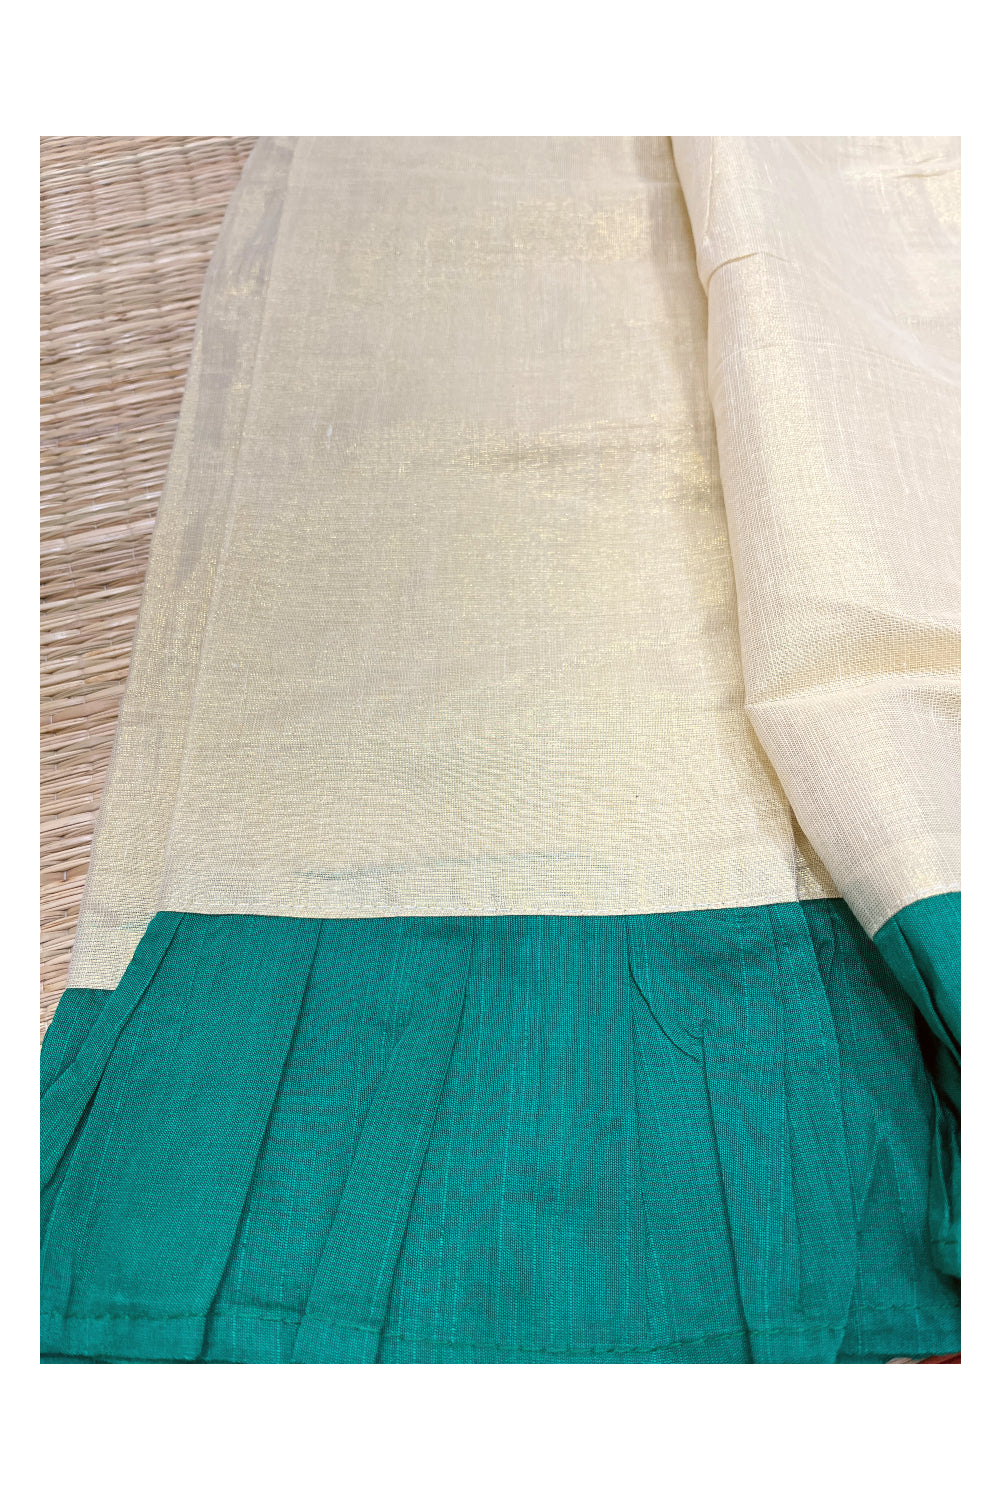 Semi Stitched Pavada Blouse with Tissue and Green Bead Works